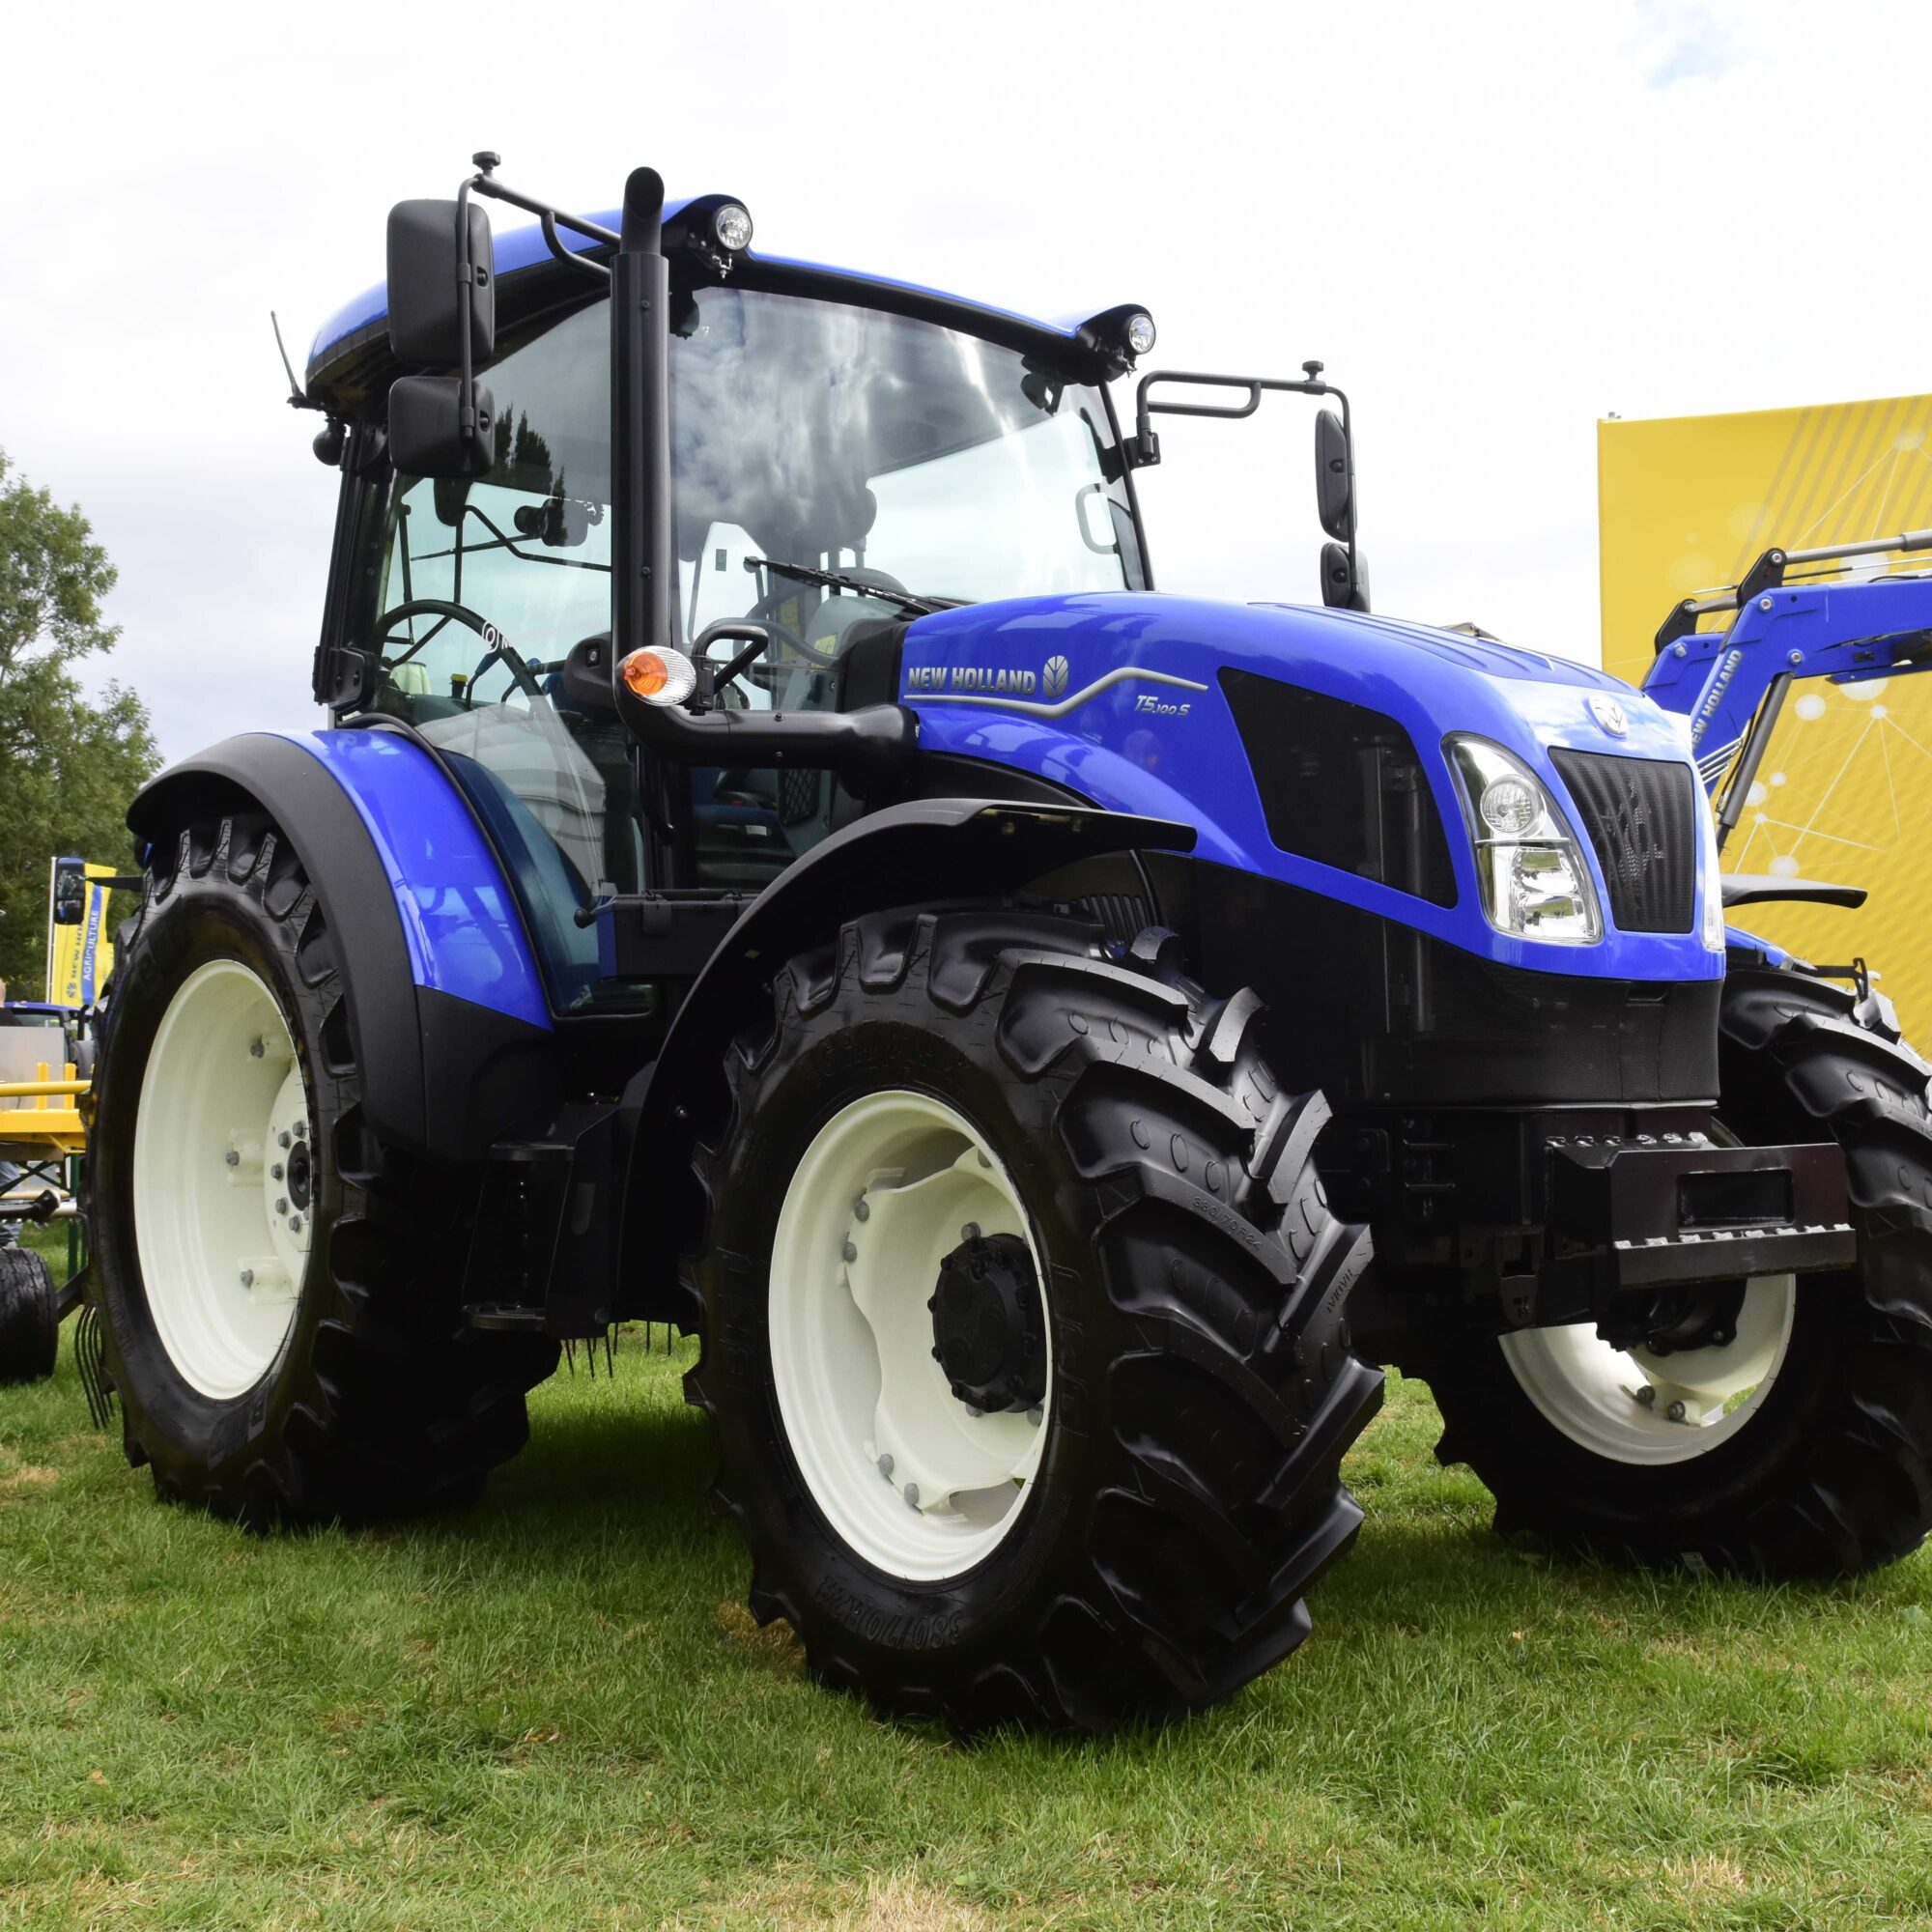 ath-newholland-t5s-2000x2000.jpg